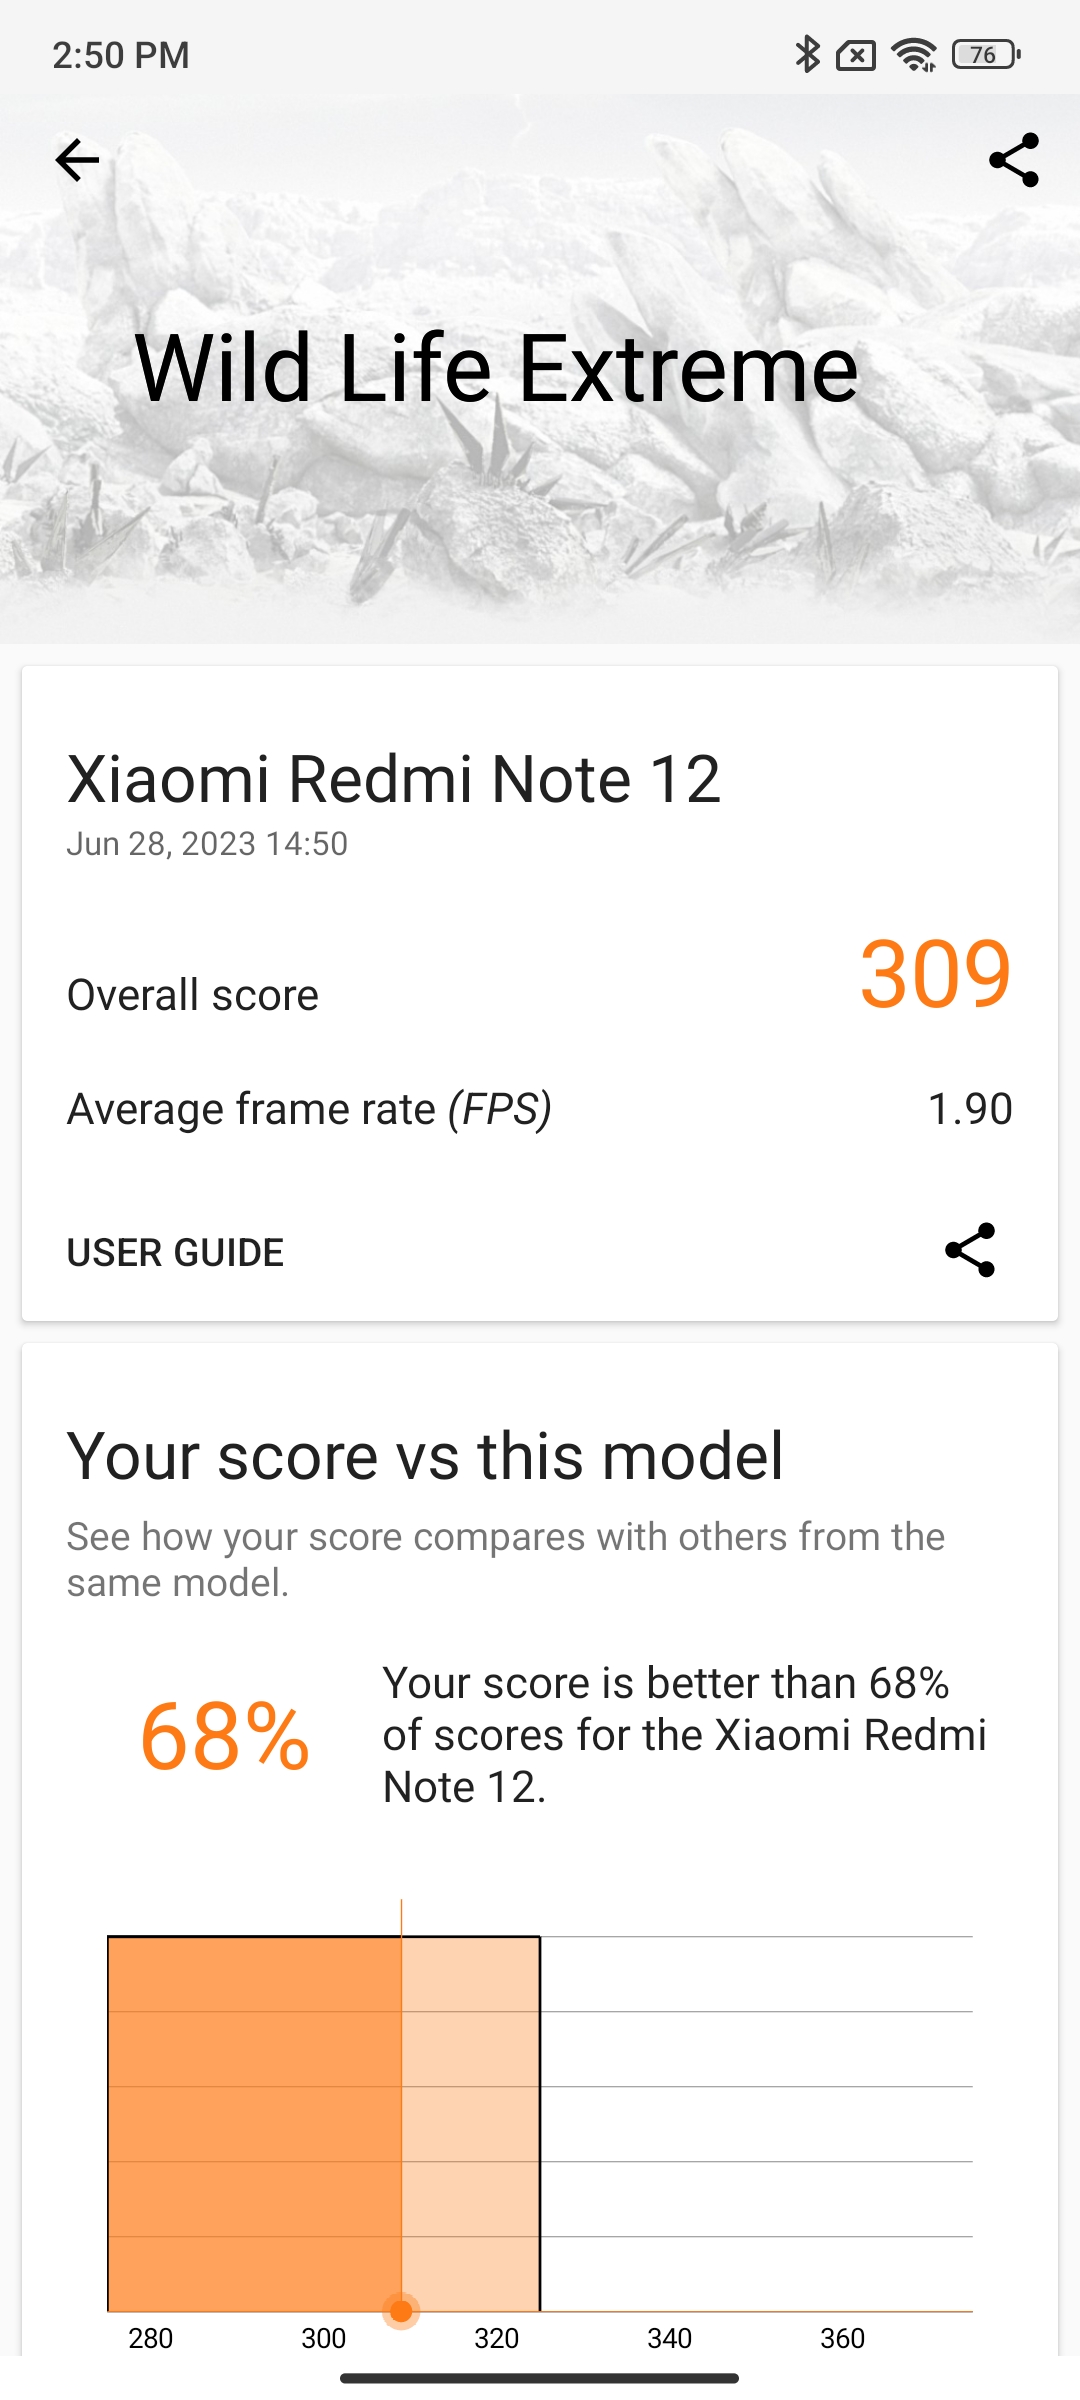 Xiaomi Redmi Note 12 5G Review: Not the Obvious Choice - Tech Advisor